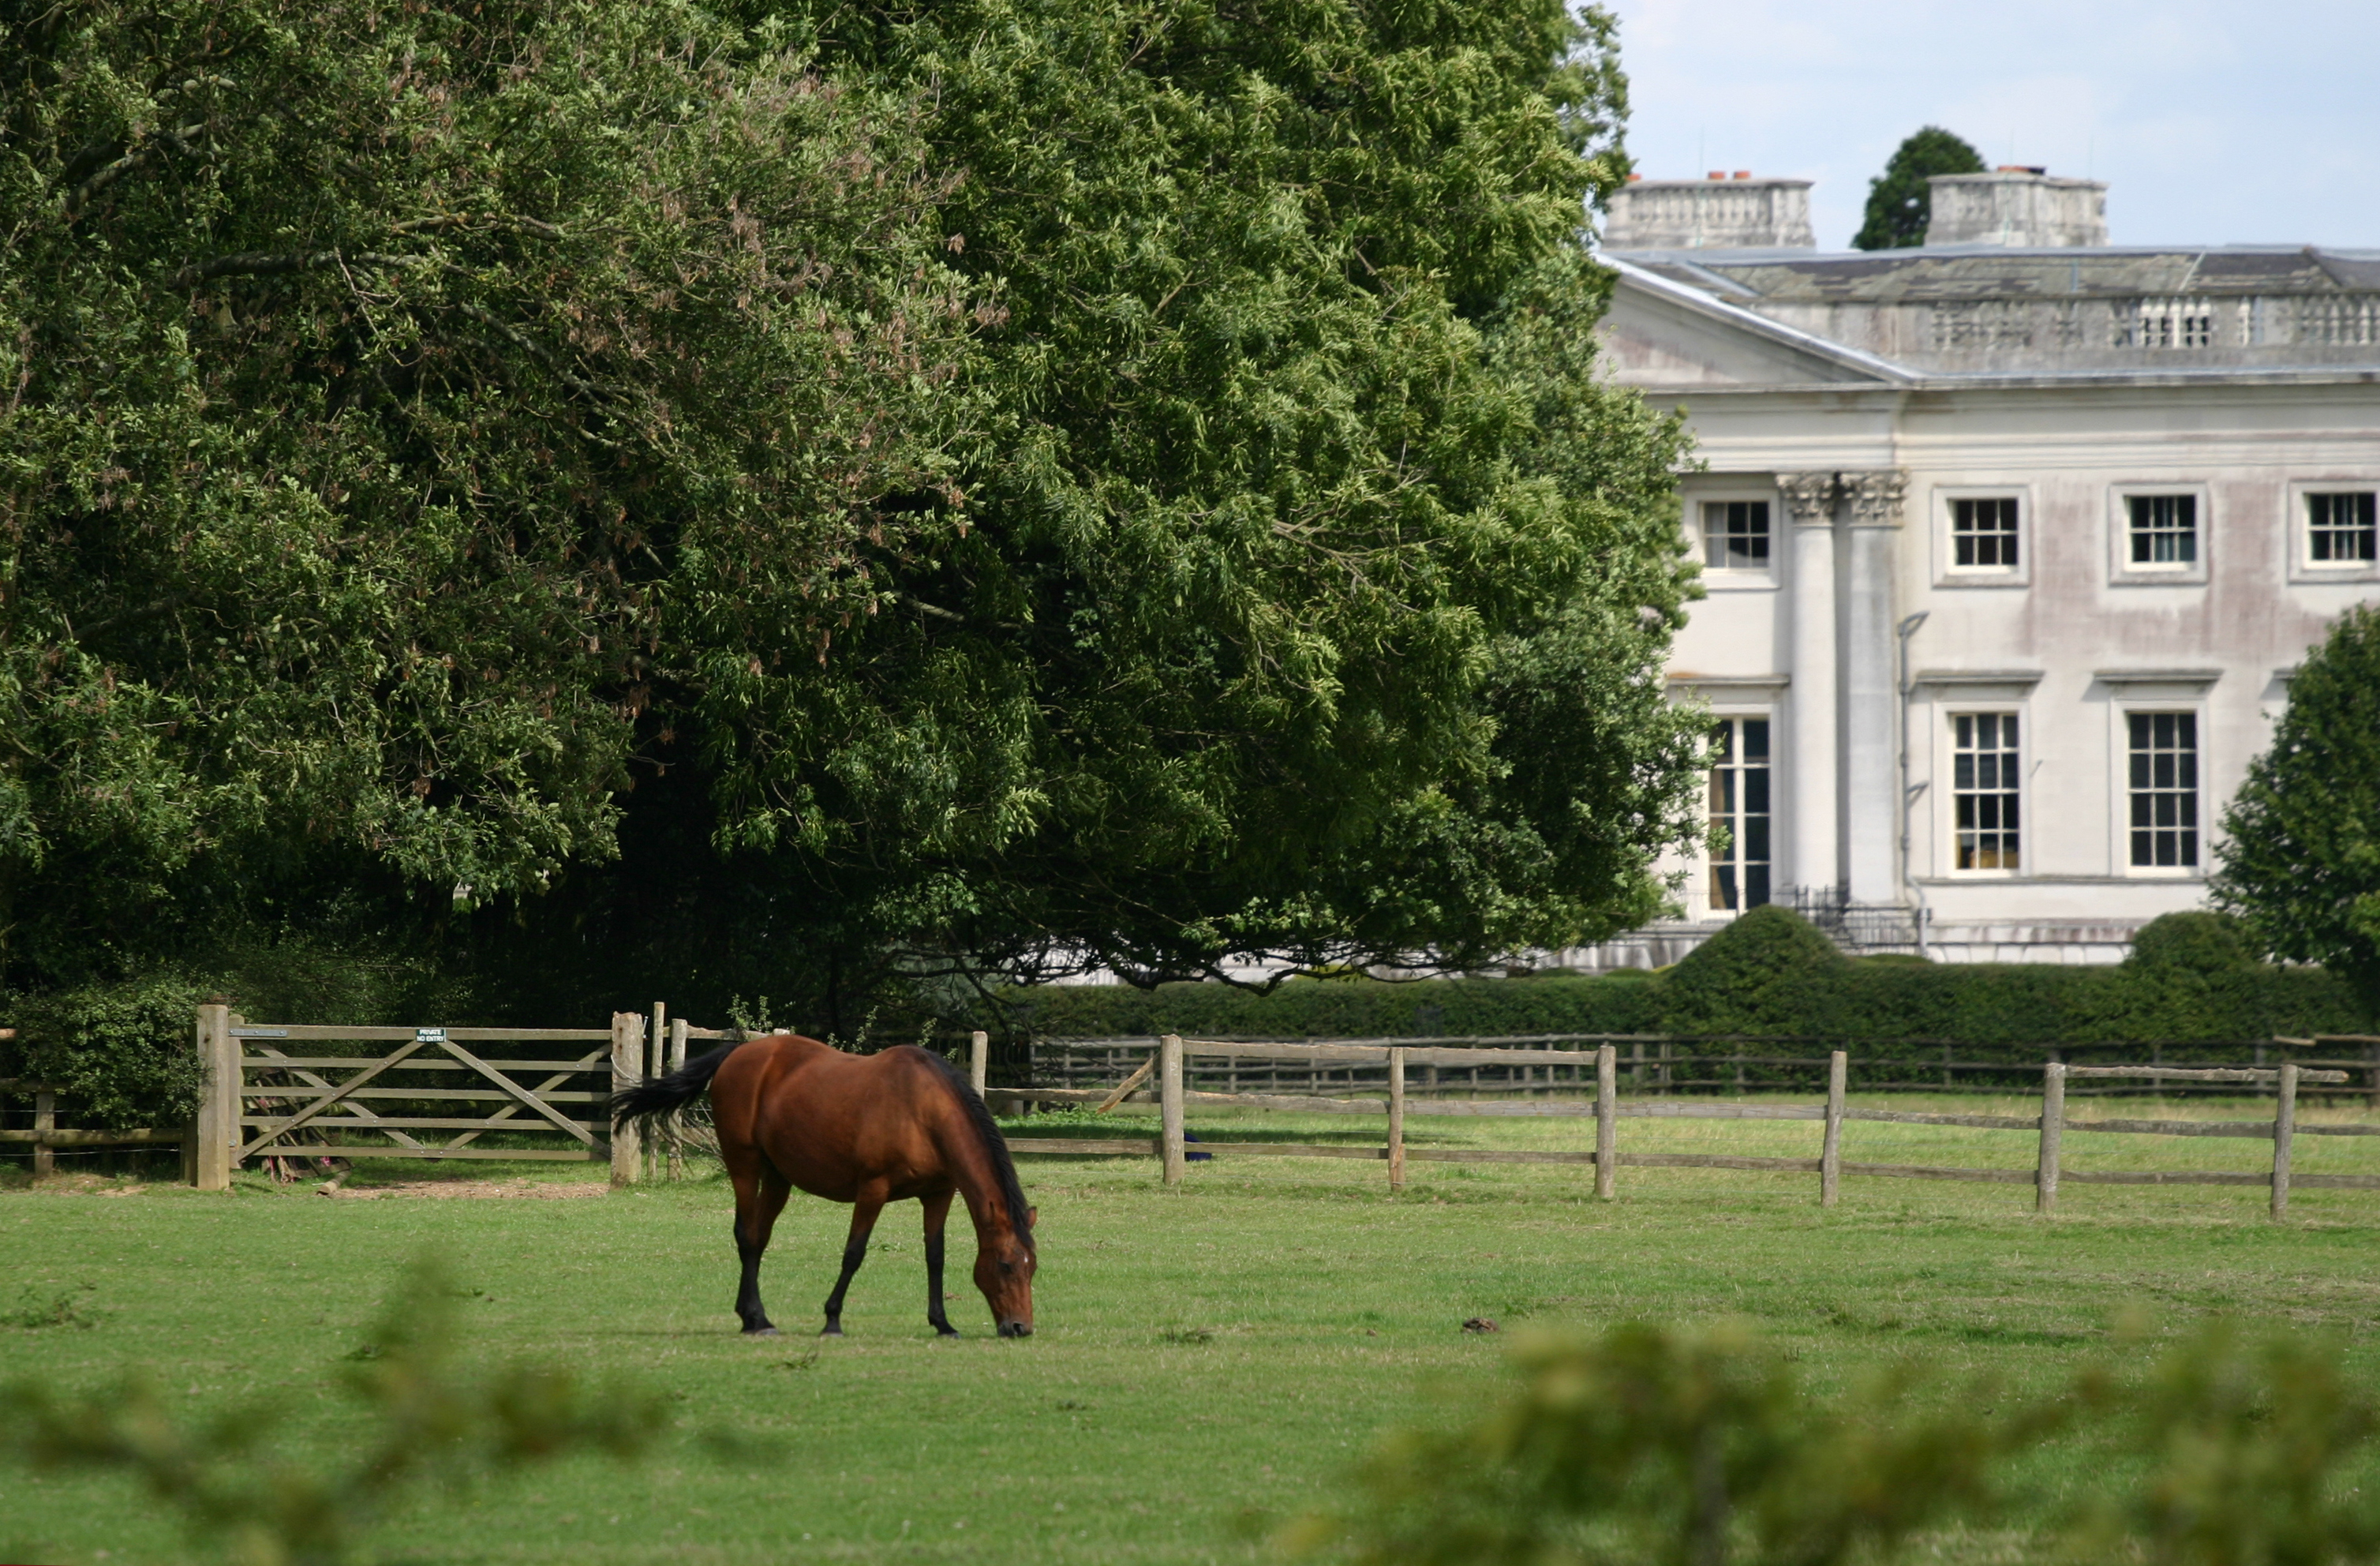 A horse in a pasture near a mansion